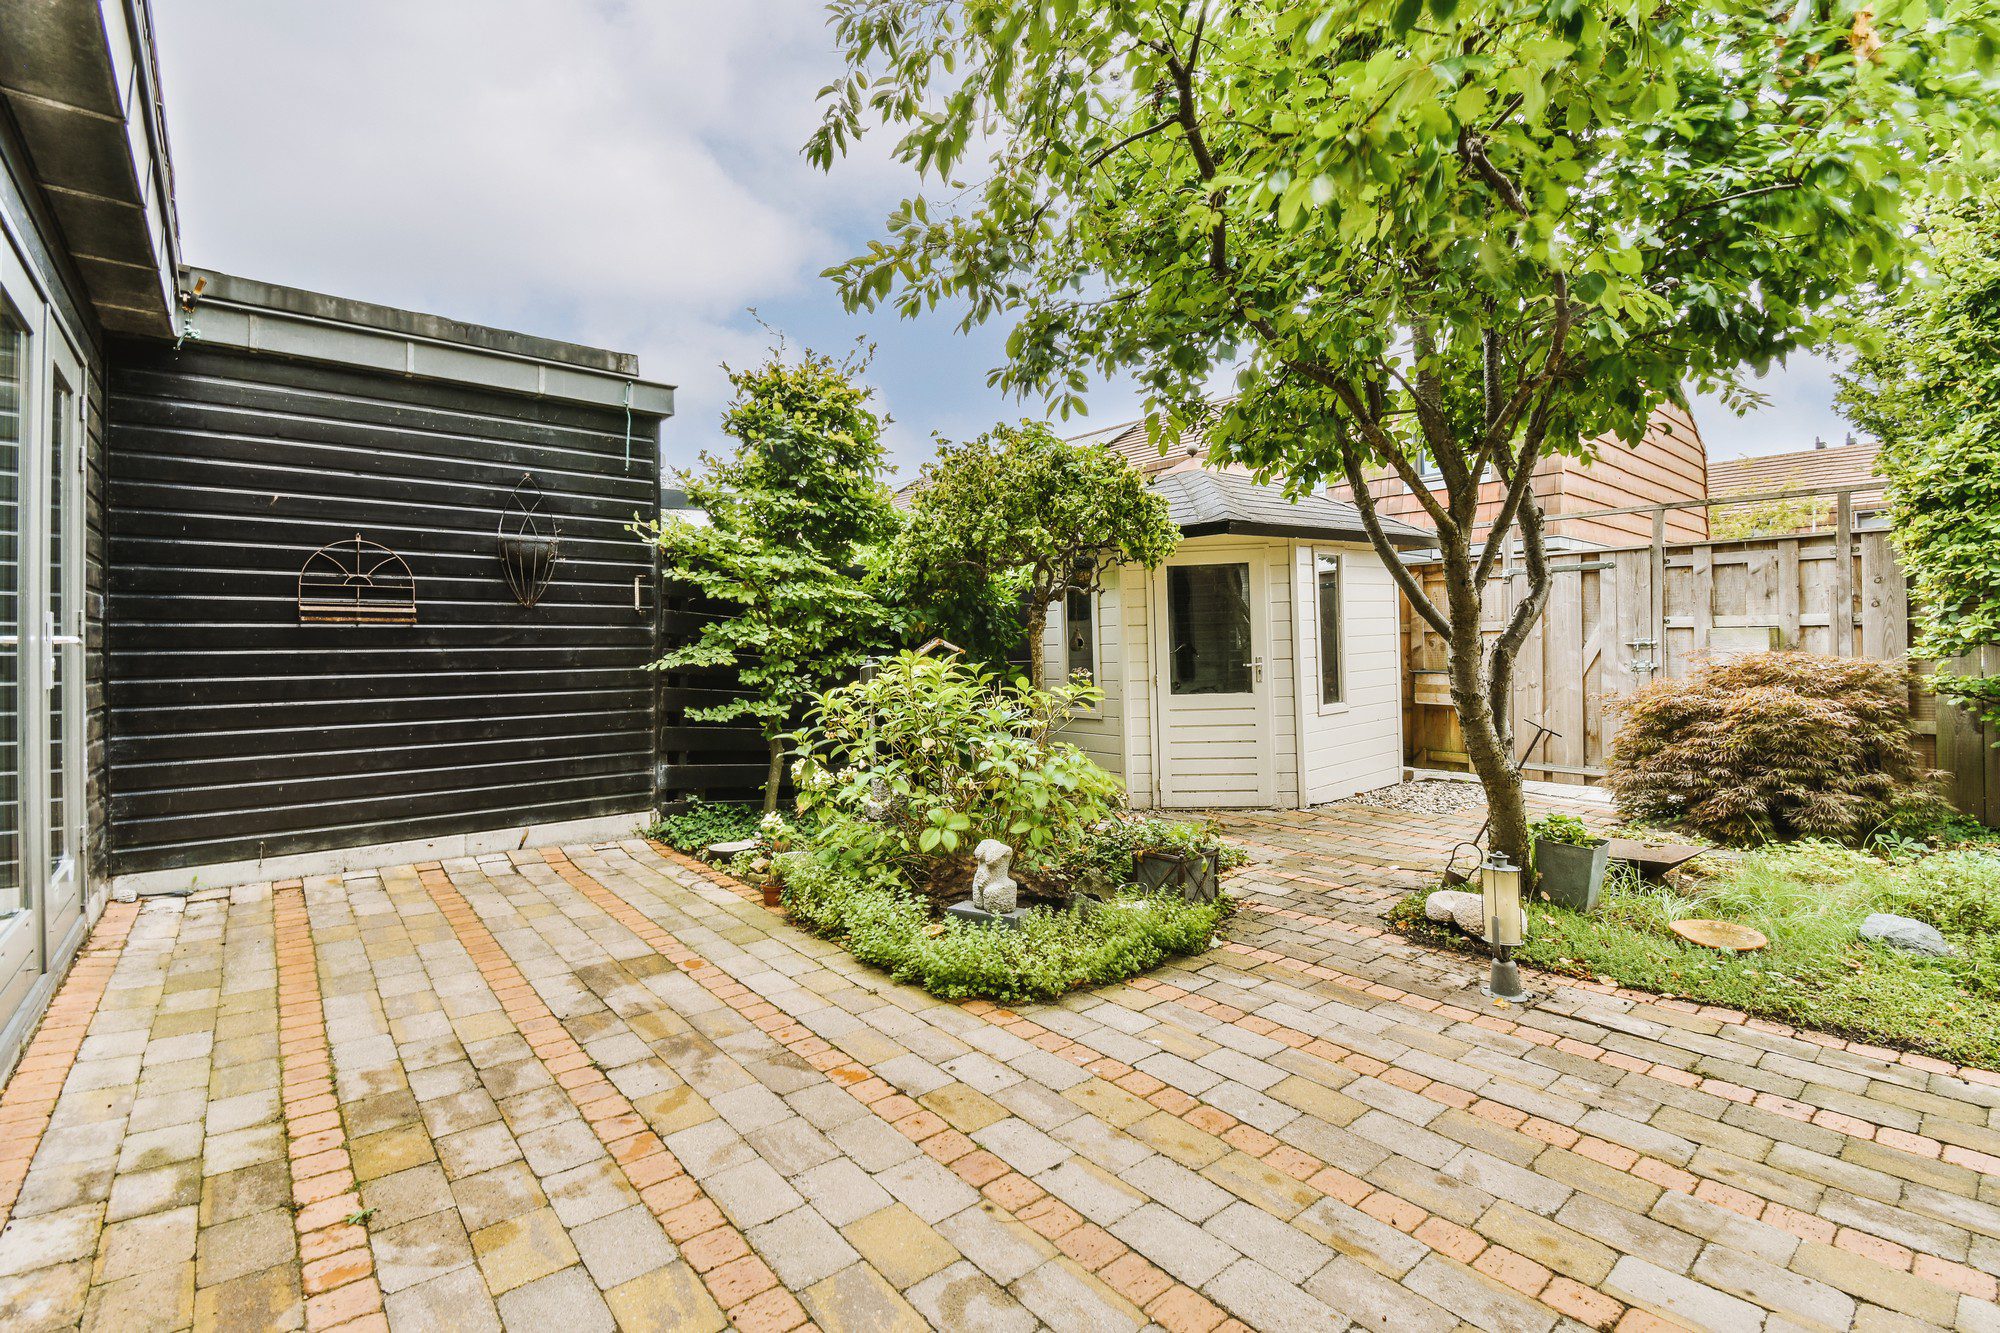 The image shows a well-maintained backyard with several notable features:1. Paving: There's a patterned paving brick area that serves as a patio or walkway, offering a durable surface for outdoor activities.2. Building: A small, light-coloured outbuilding with a white door, which could be a shed, workshop, or studio, is visible.3. Fencing: A wood fence surrounding the area provides privacy. Some sections of the fence have a vertical slat design, while others are more solid.4. Vegetation: The yard has various plants, including a prominent tree in the centre, shrubs, and smaller plants arranged in a landscaped bed with a decorative border.5. Decorative Elements: There are artistic features attached to the dark wall on the left side, resembling geometric shapes, possibly metal garden wall art. Various garden accessories, such as bird feeders and garden sculptures, are scattered throughout.Overall, the backyard gives a sense of a private, peaceful outdoor space for relaxation and enjoyment of nature.